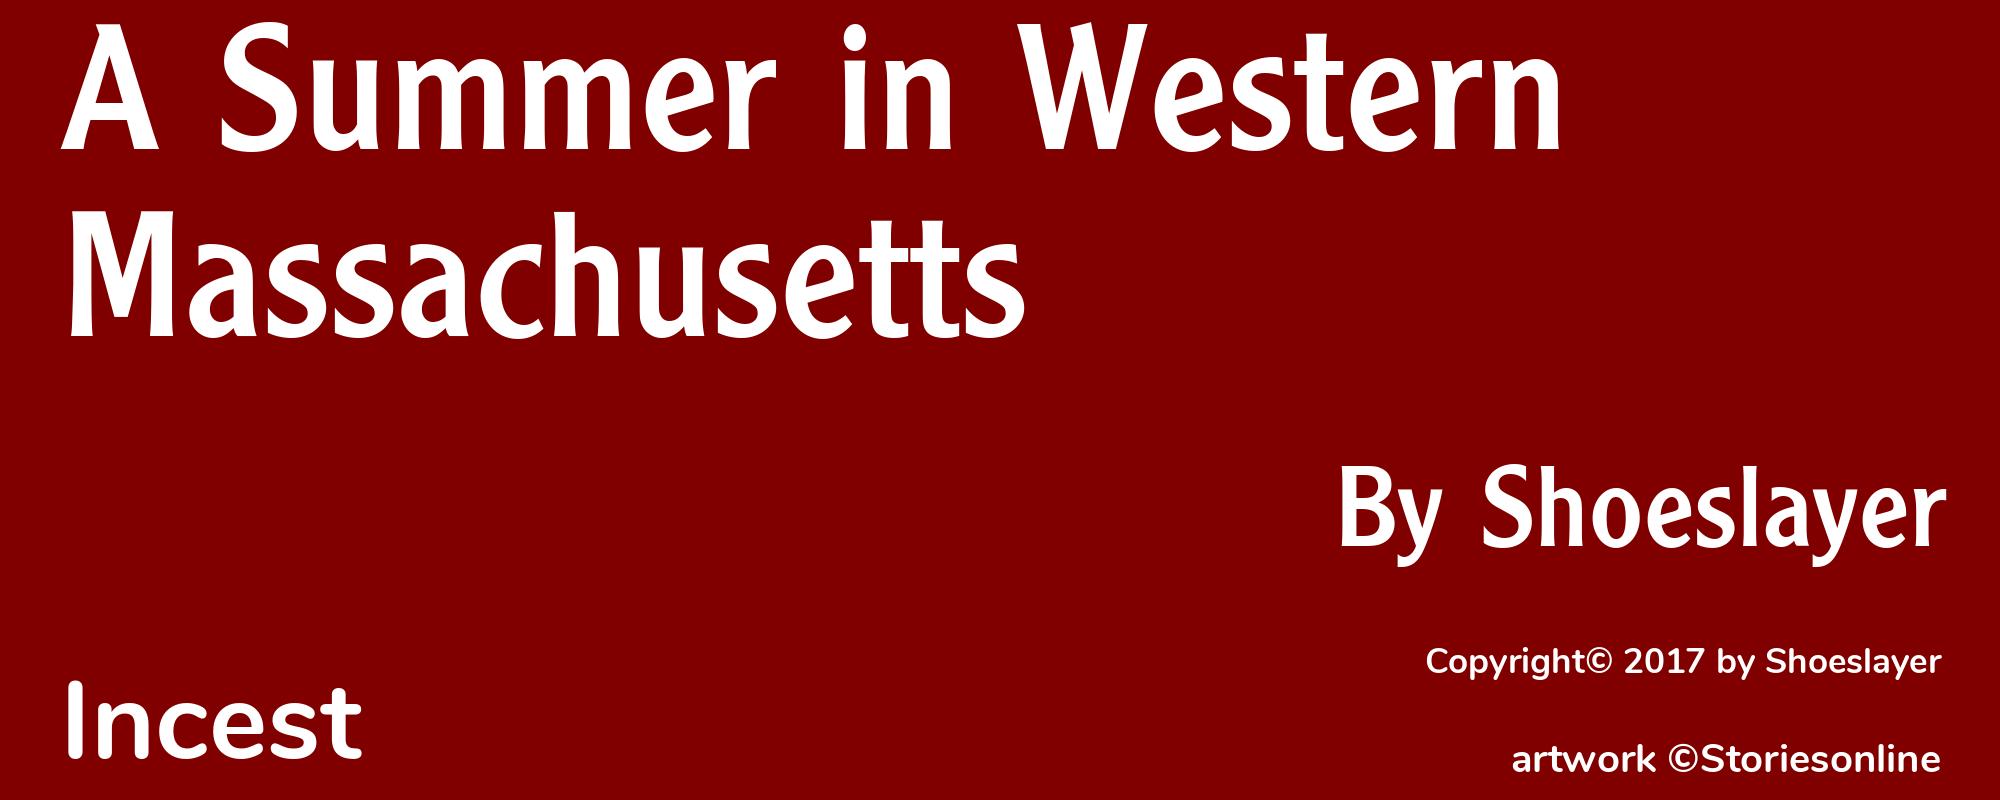 A Summer in Western Massachusetts - Cover